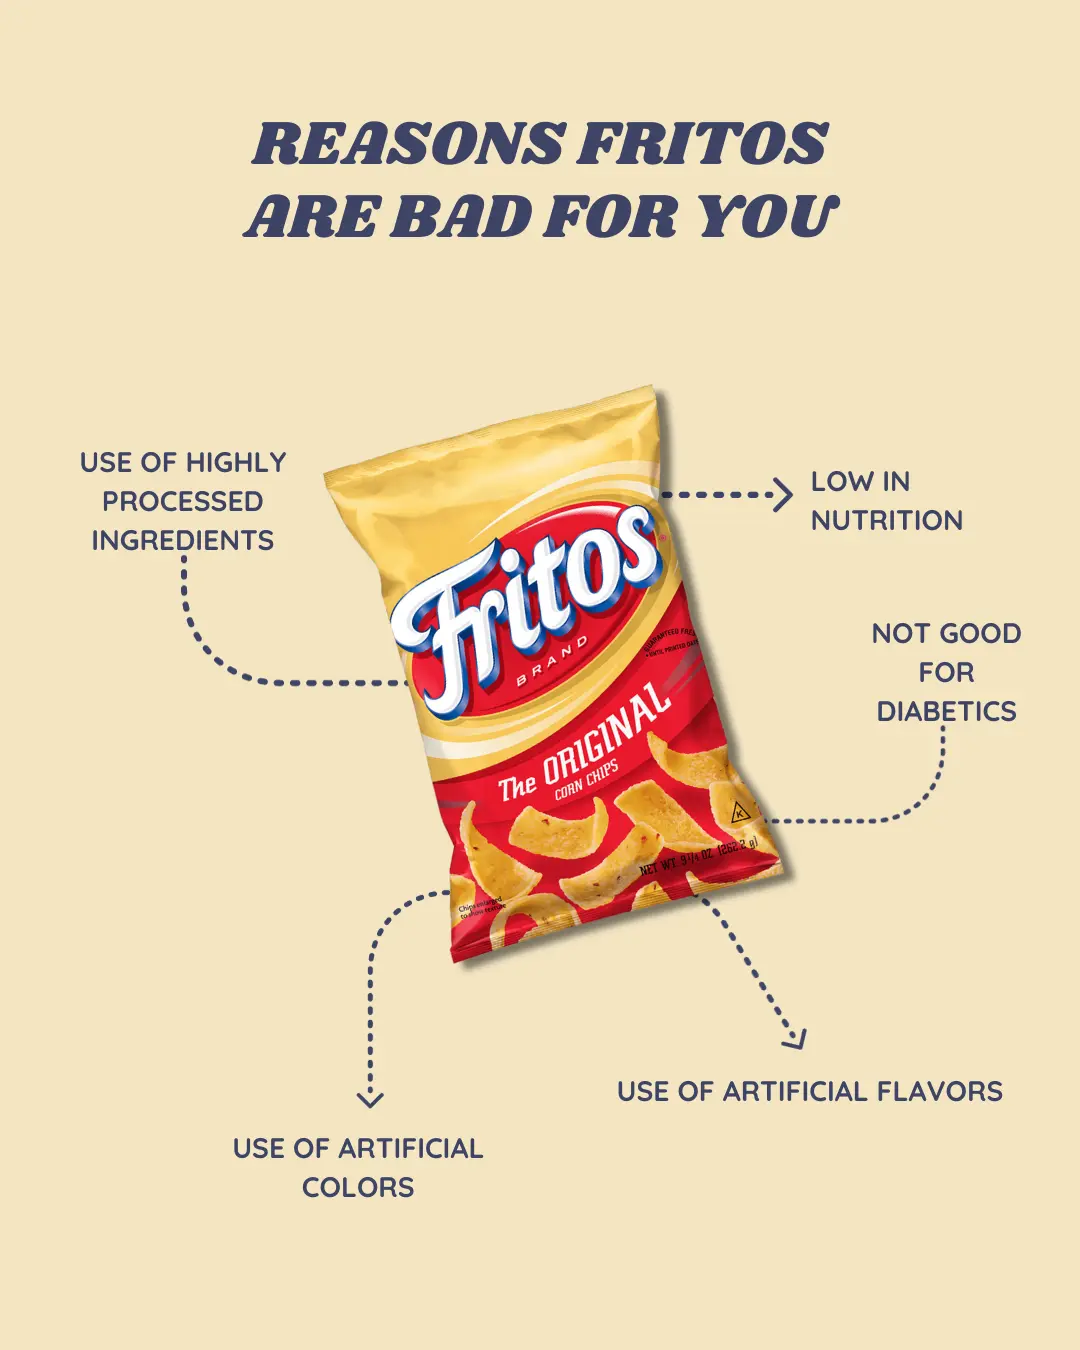 Fritos are bad for you